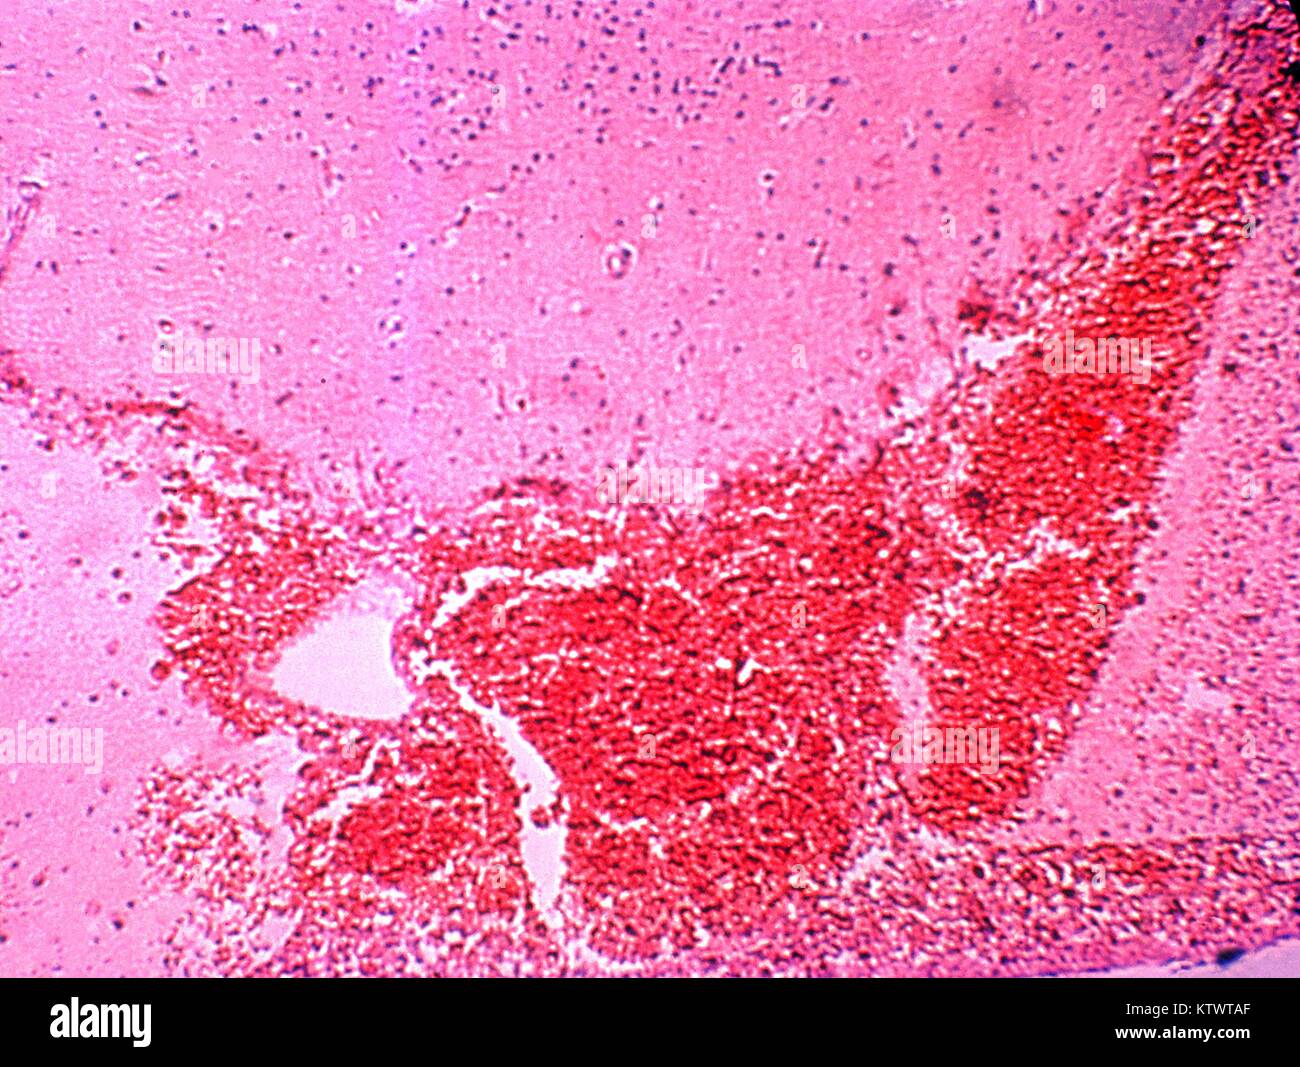 A photomicrograph demonstrating the histopathologic changes in brain tissue due to Salmonella typhi bacteria. Salmonella septicemia has been associated with subsequent infection of virtually every organ system, and the nervous system is no exception. Here we see an acute inflammatory encephalitis due to S. typhi bacteria. Image courtesy CDC/Armed Forces Institute of Pathology, Charles N. Farmer, 1964. Stock Photo